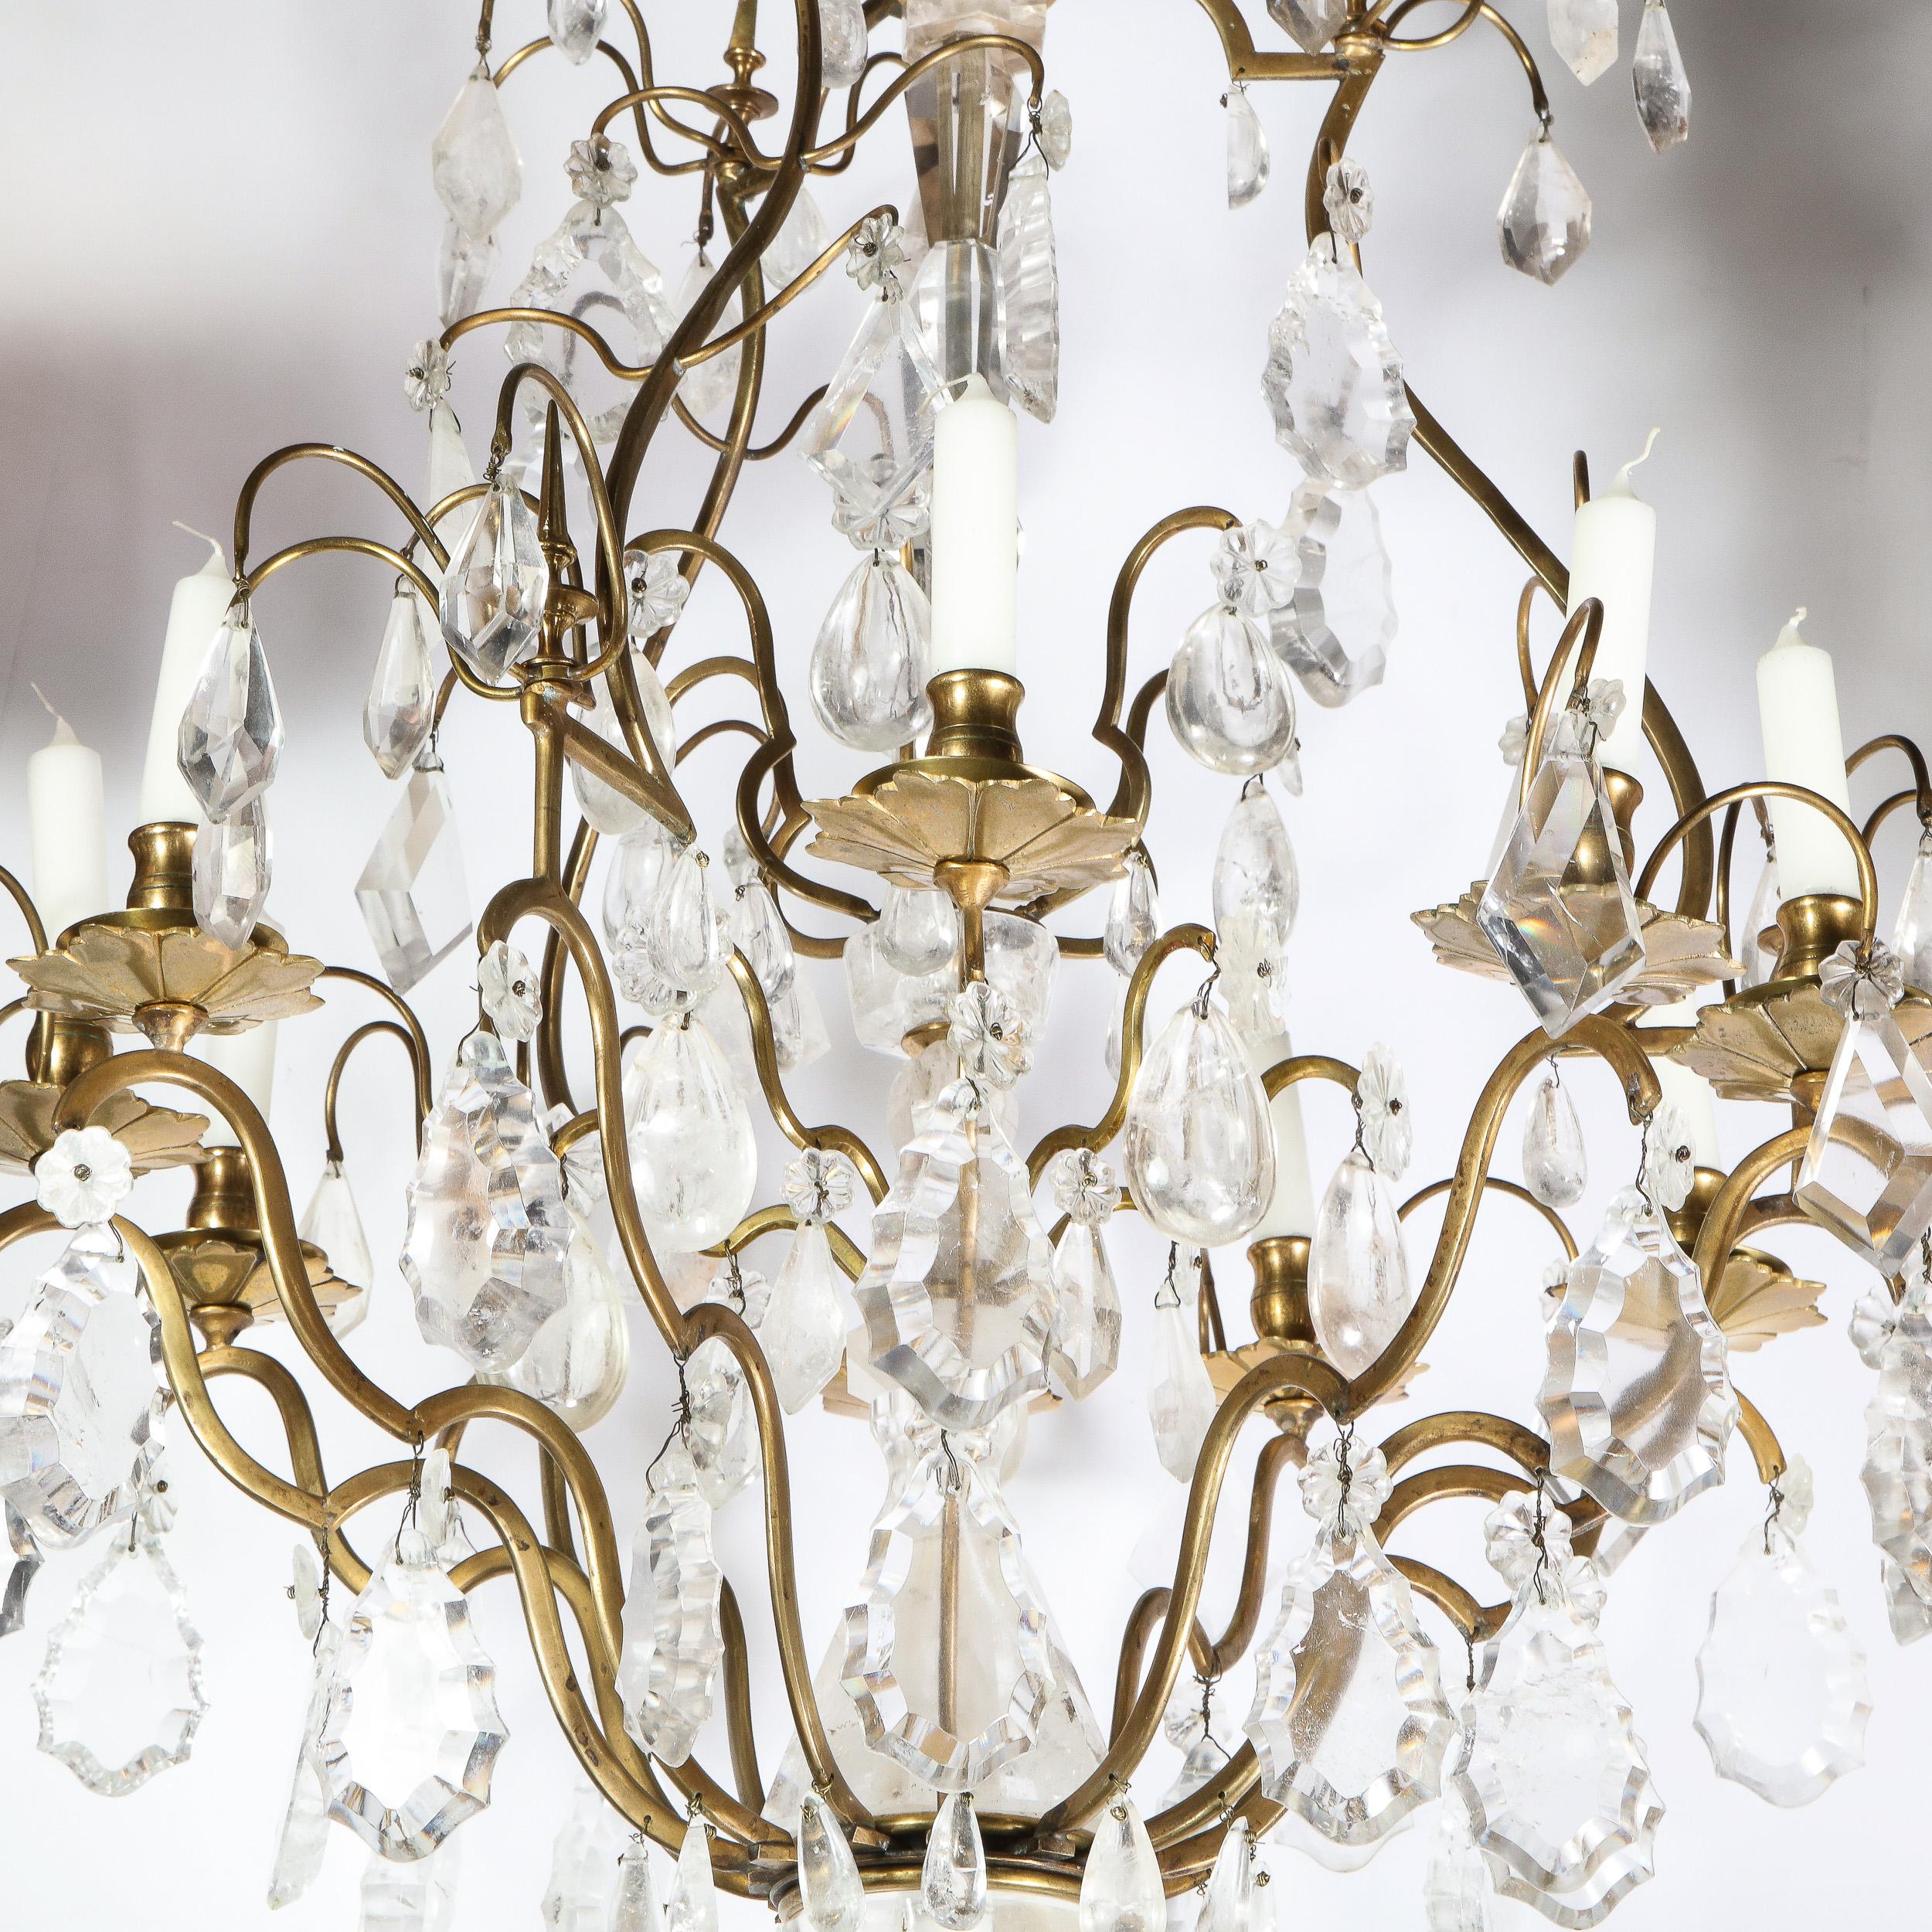 French Early 19th Century Louis XV Nine-Arm Rock Crystal & Bronze Sculptural Chandelier